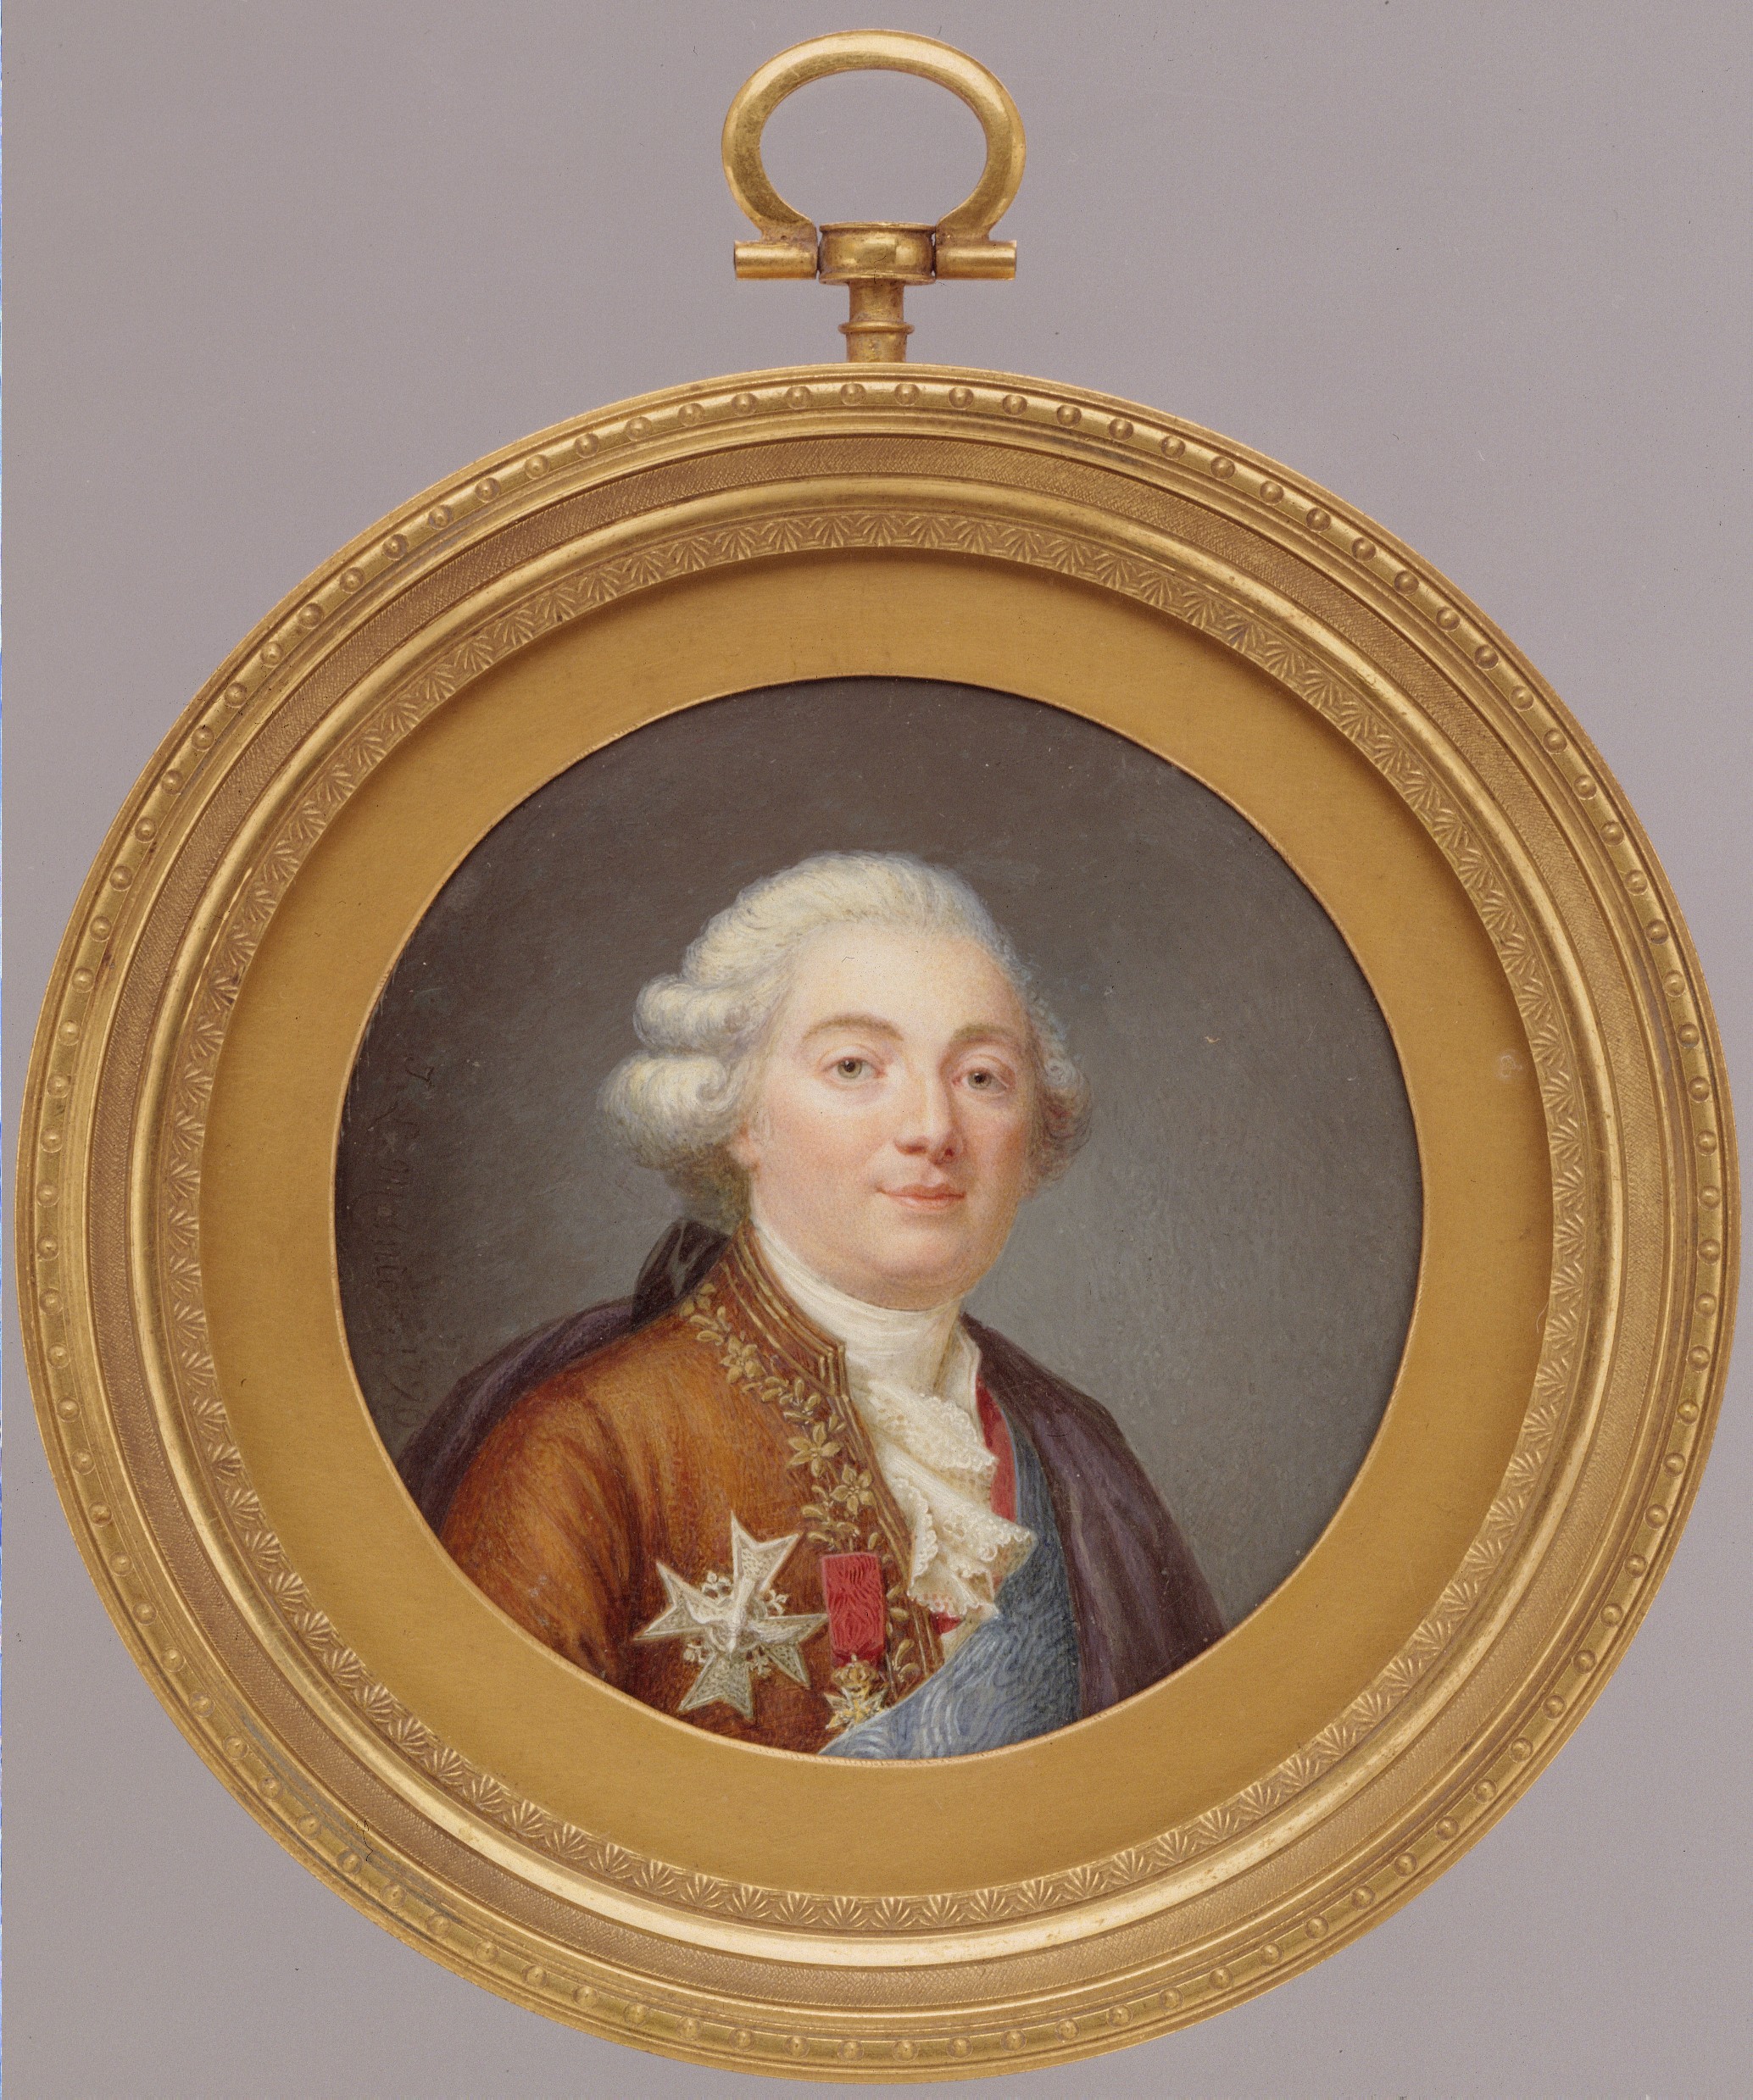 King Louis XVI of France, in winter costume 1776 with